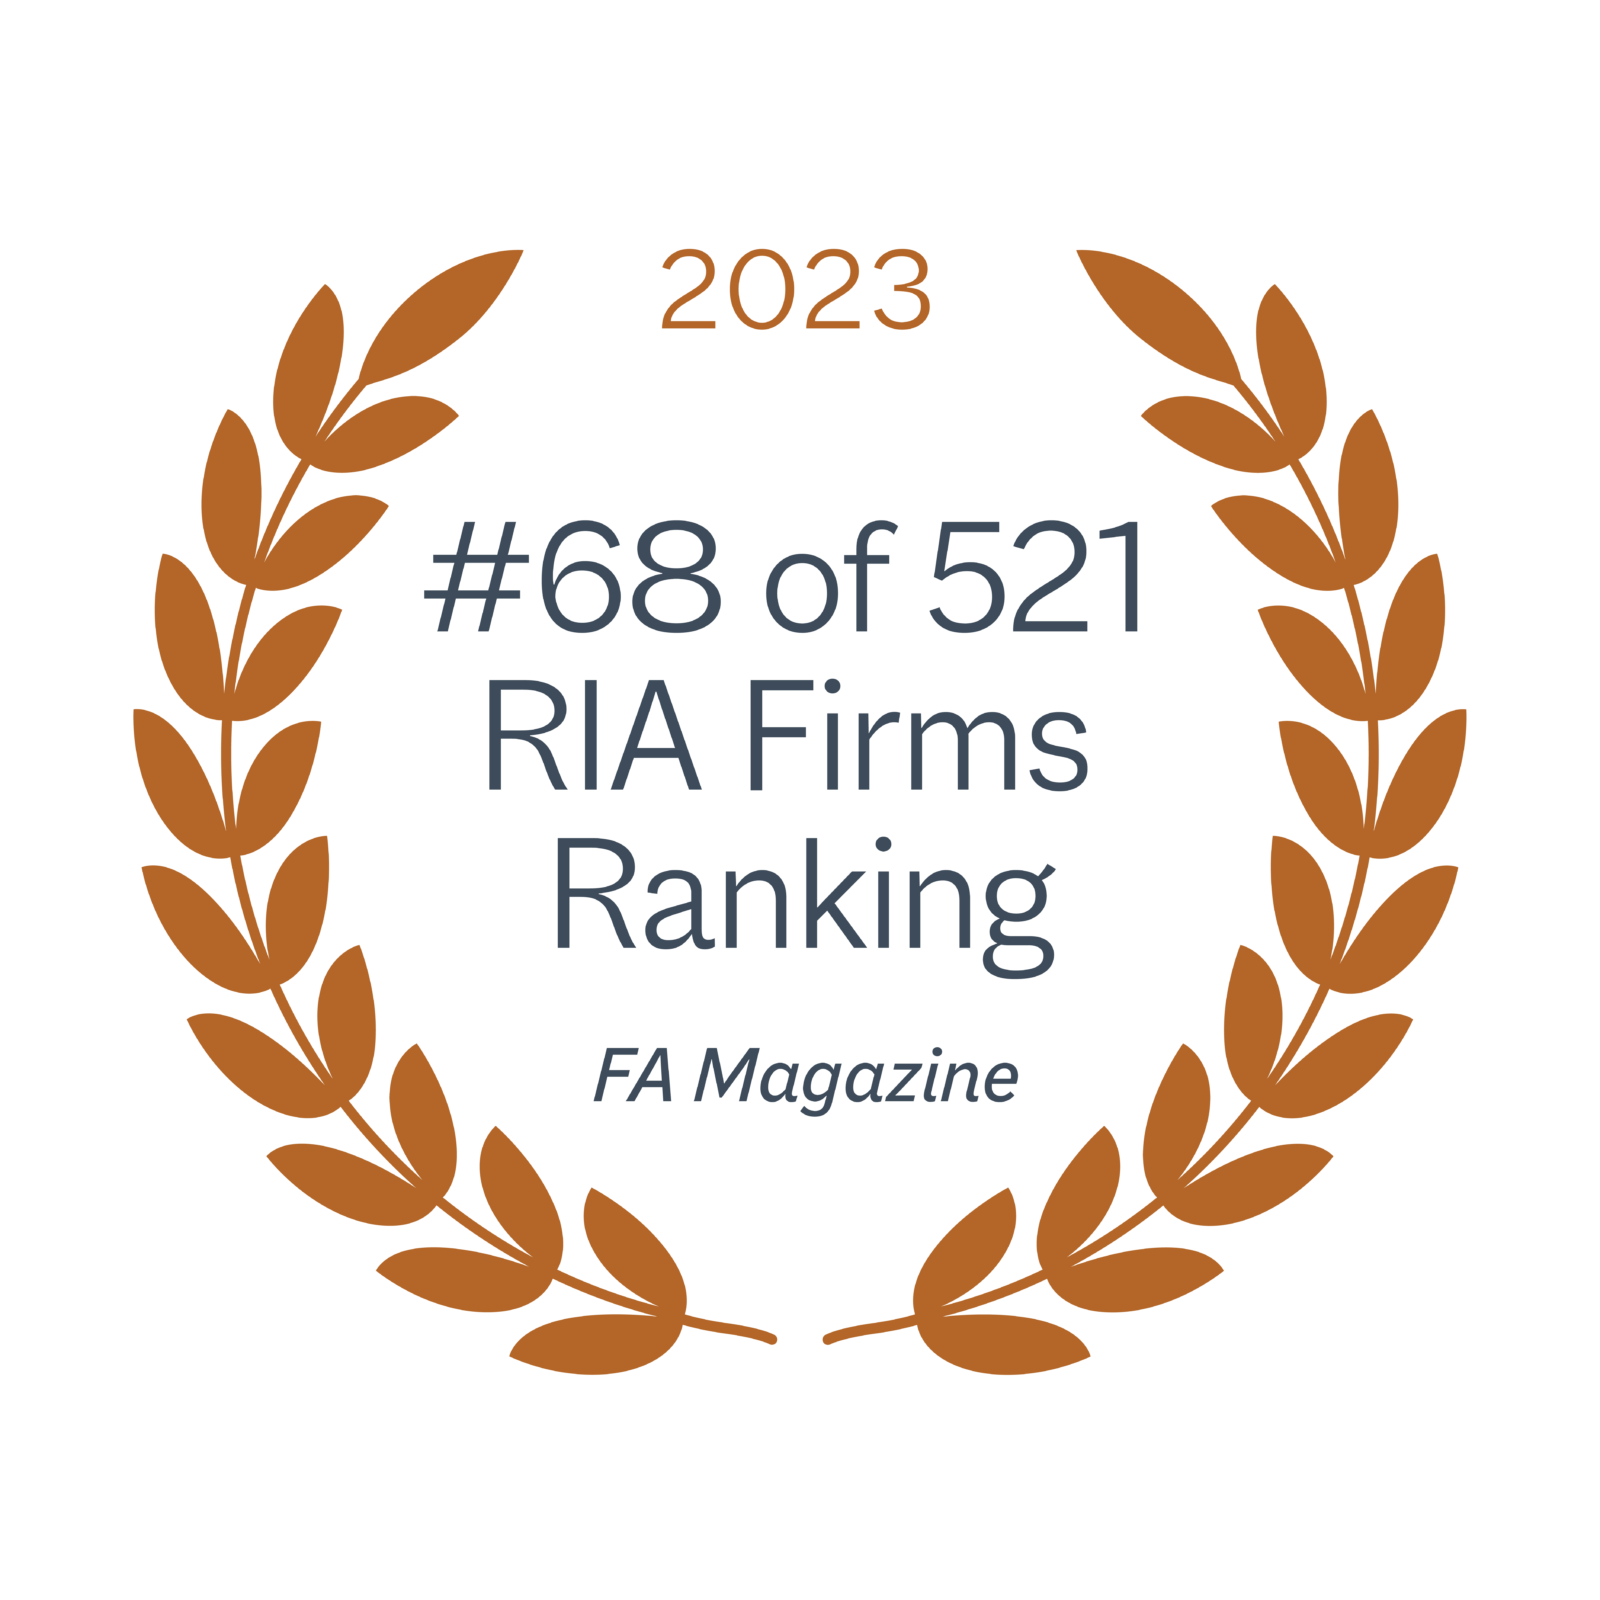 #68 of 521 RIA Firms Ranking by FA Magazine for 2023